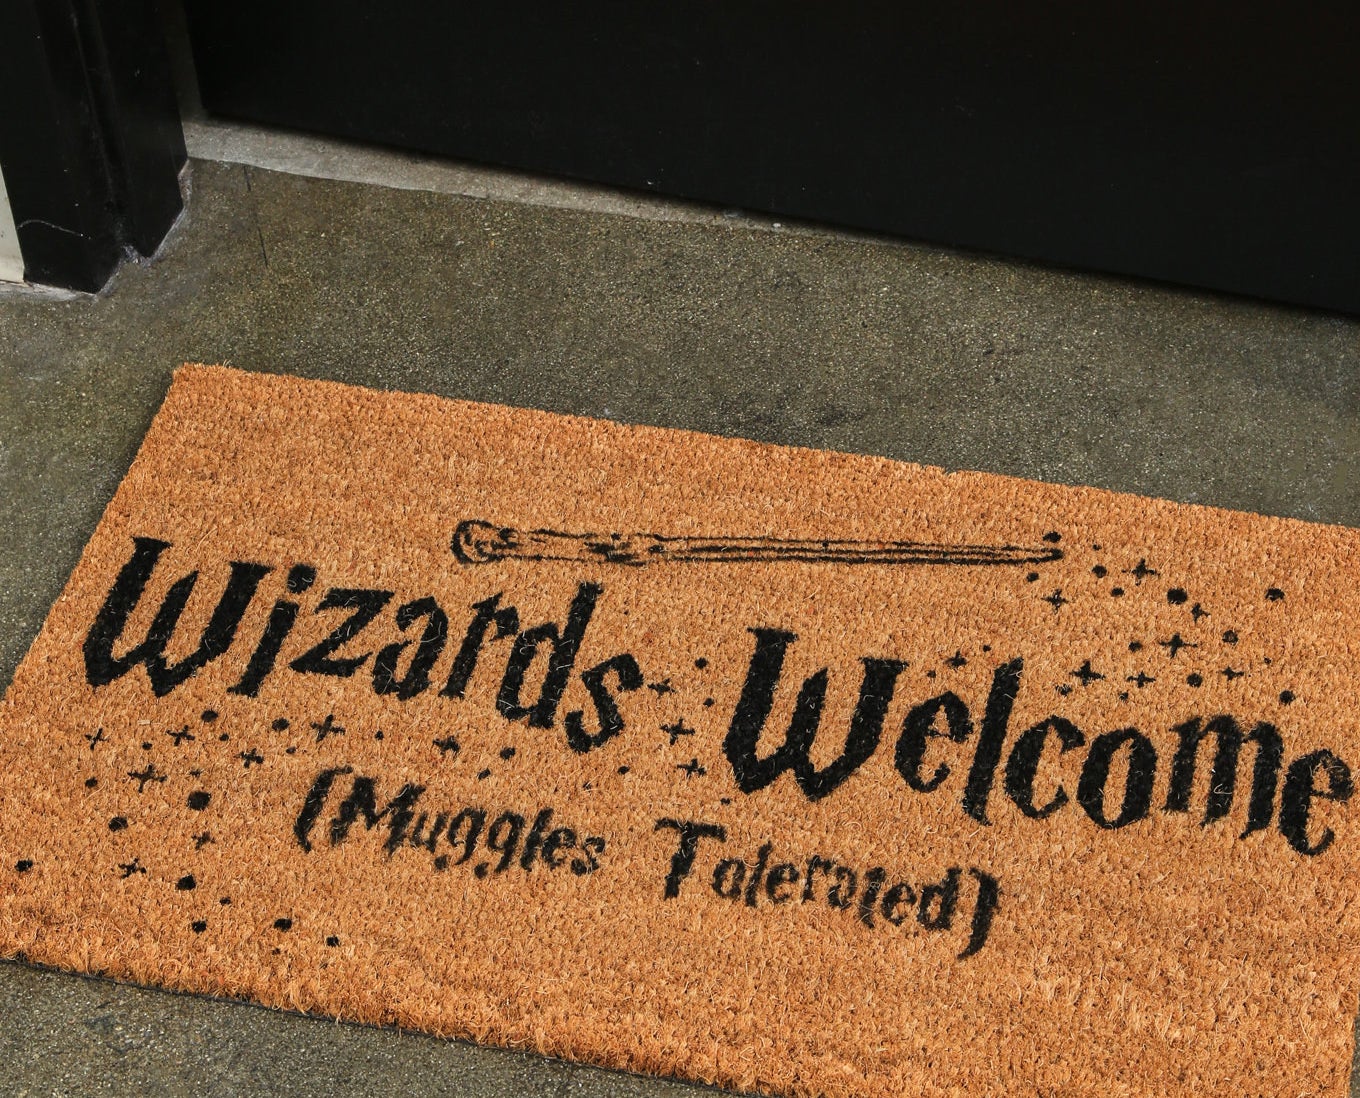 the mat with text &quot;Wizards Welcome (Muggles Tolerated)&quot; 